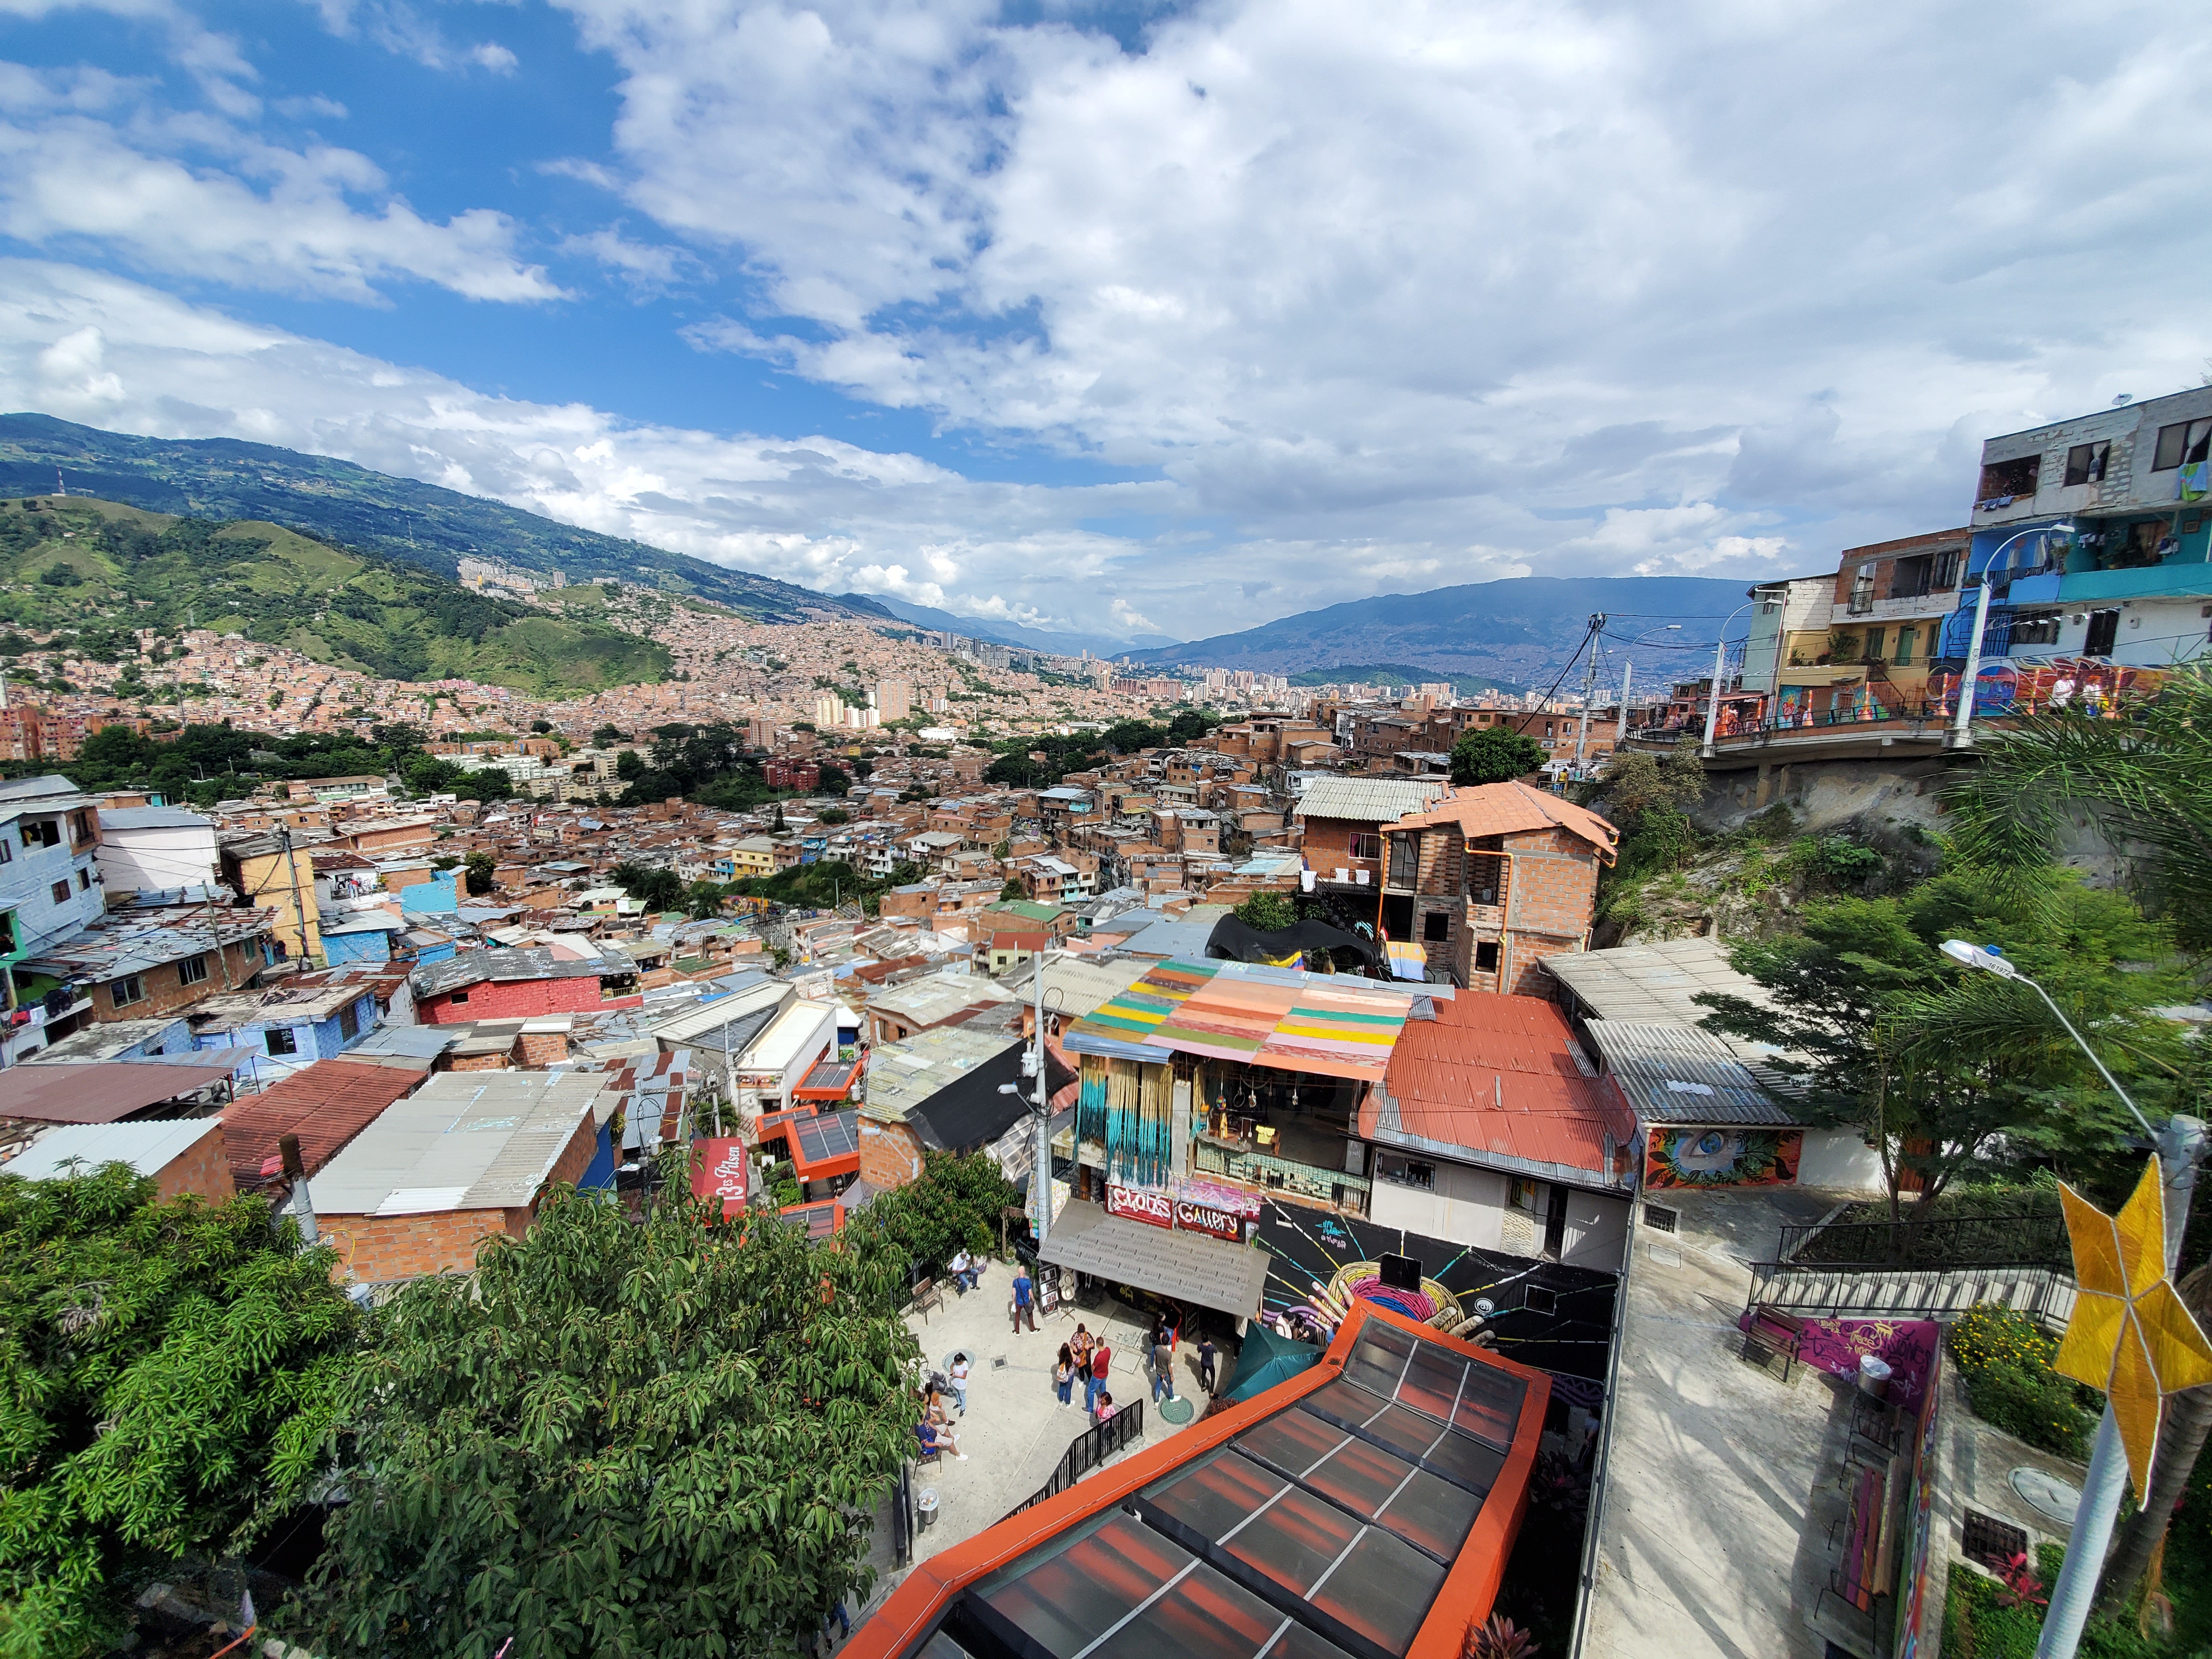 Comuna 13 offers spectacular views of greater Medellin